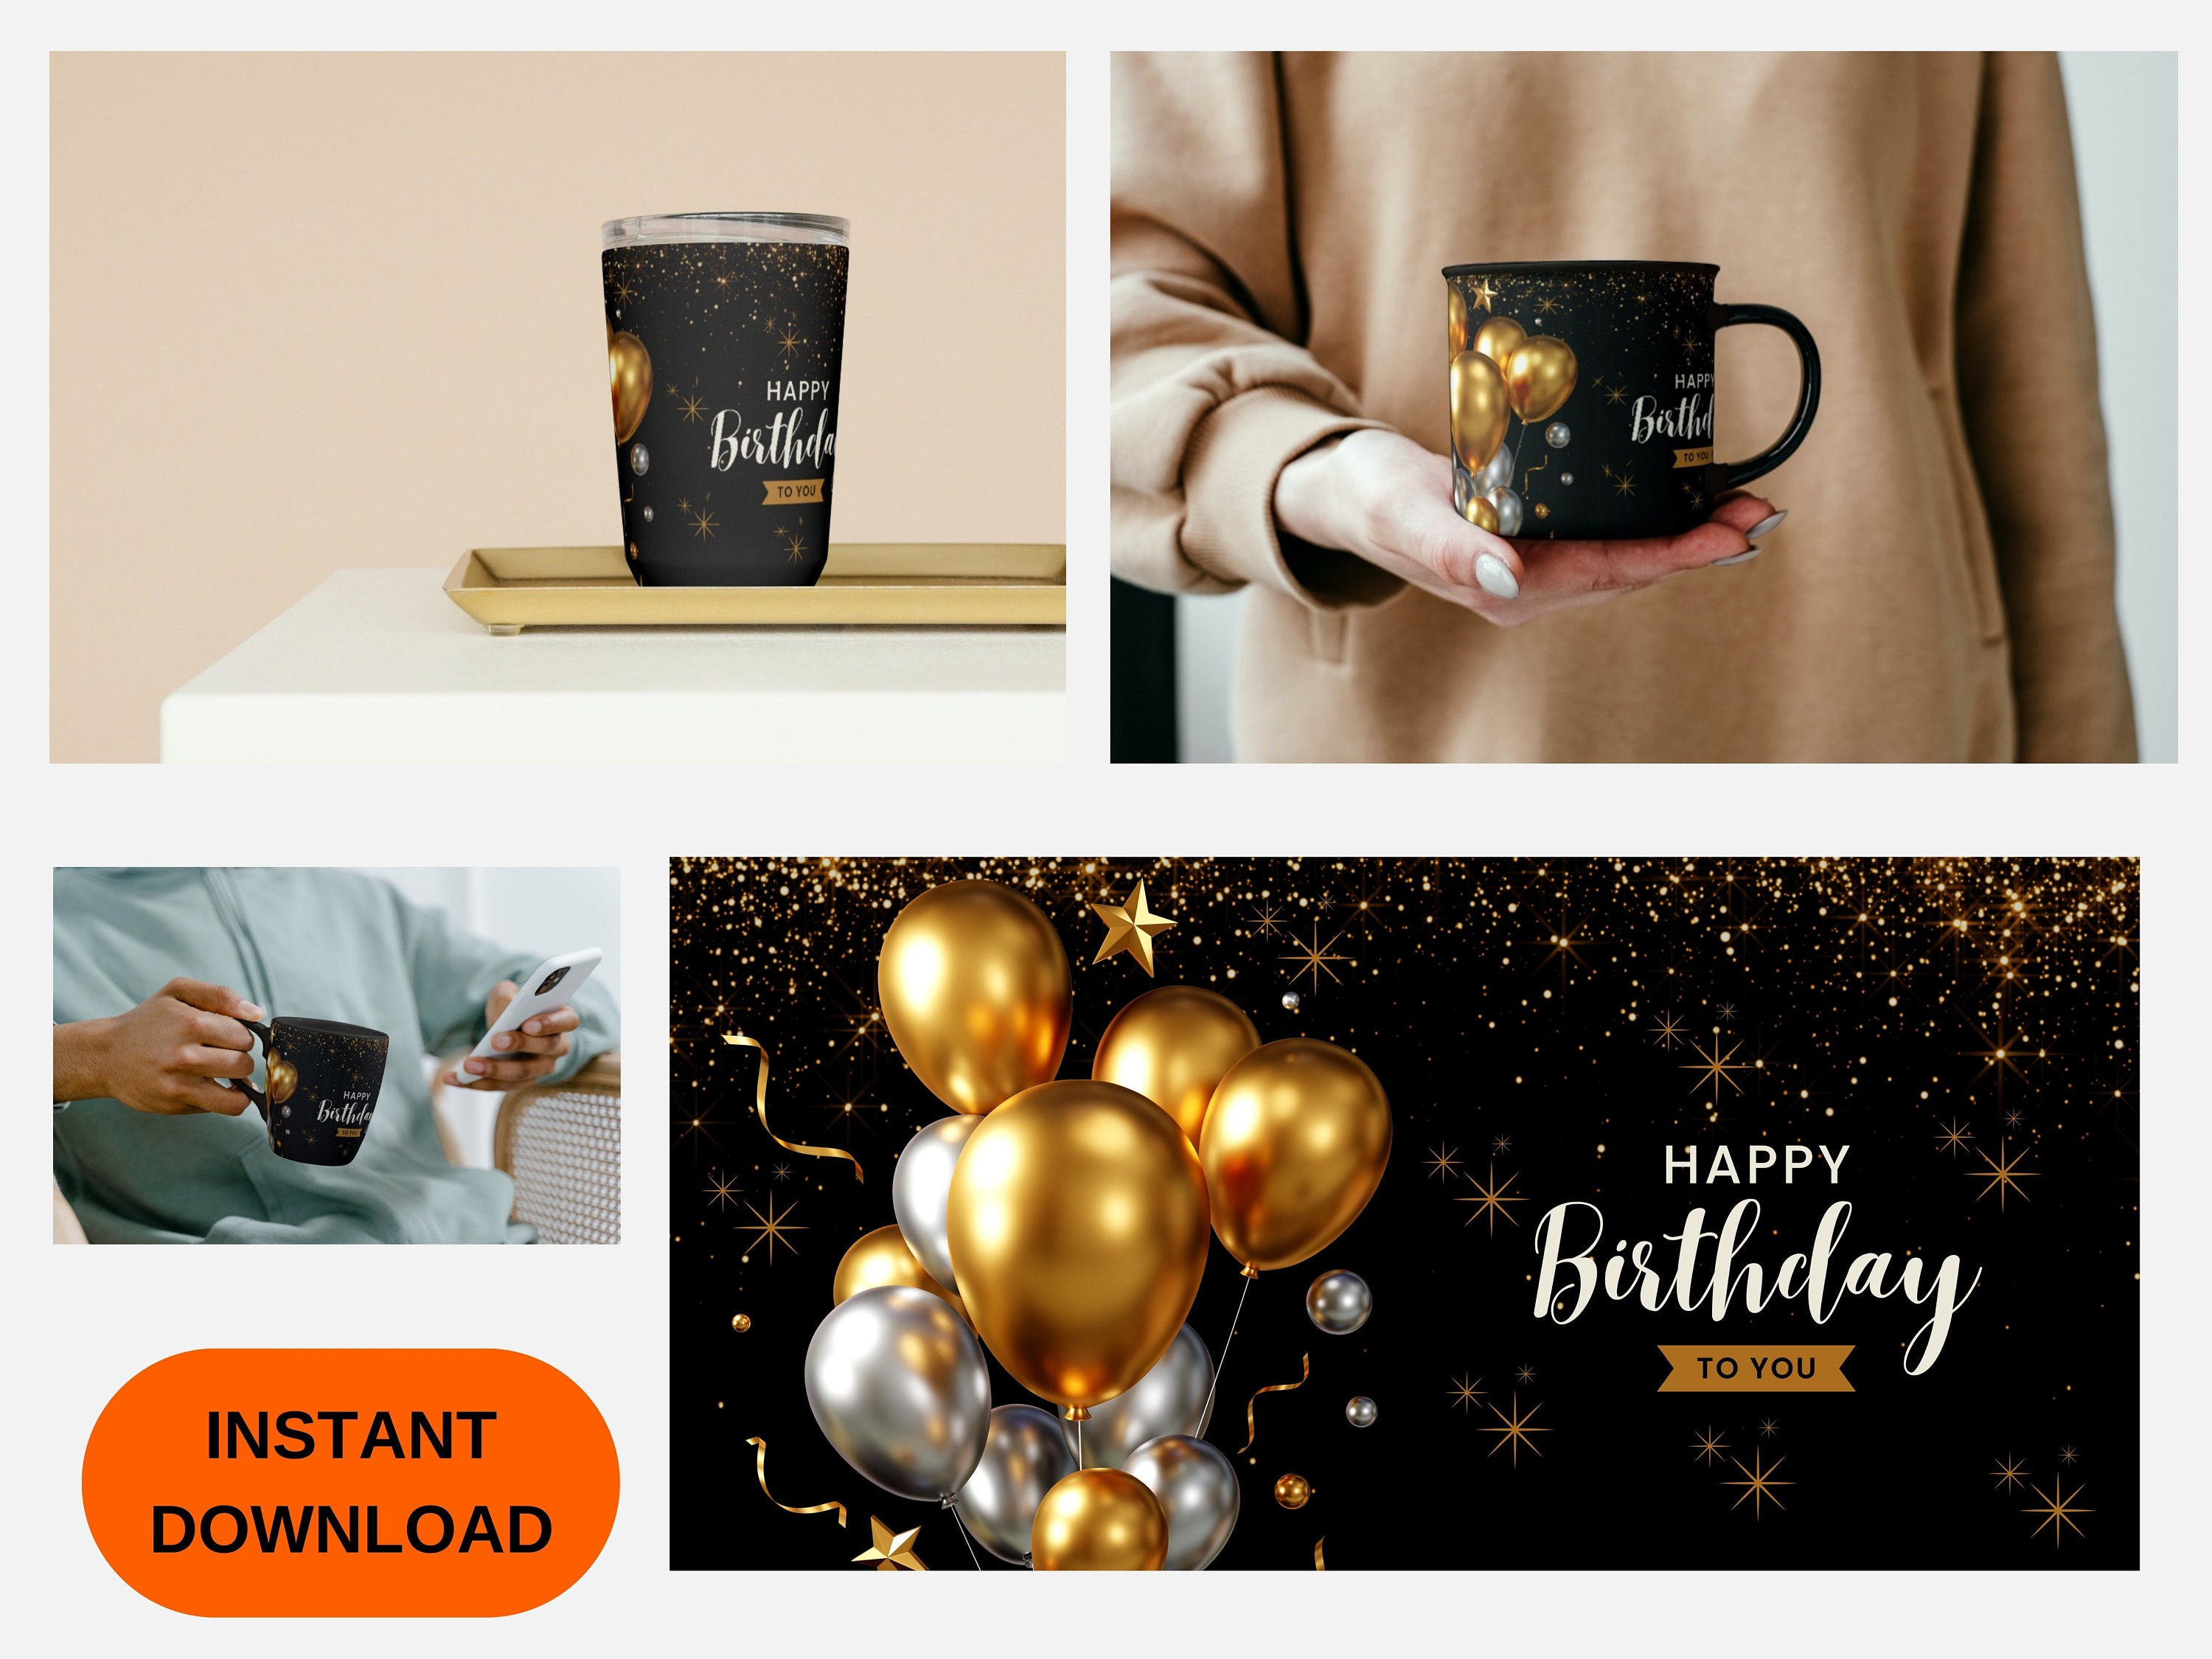 Happy Birthday Photo/memory Mug Sublimation Design for 11oz-15oz Mugs.  Presized for Your Convinience. Just Add Photo and Print -  Finland